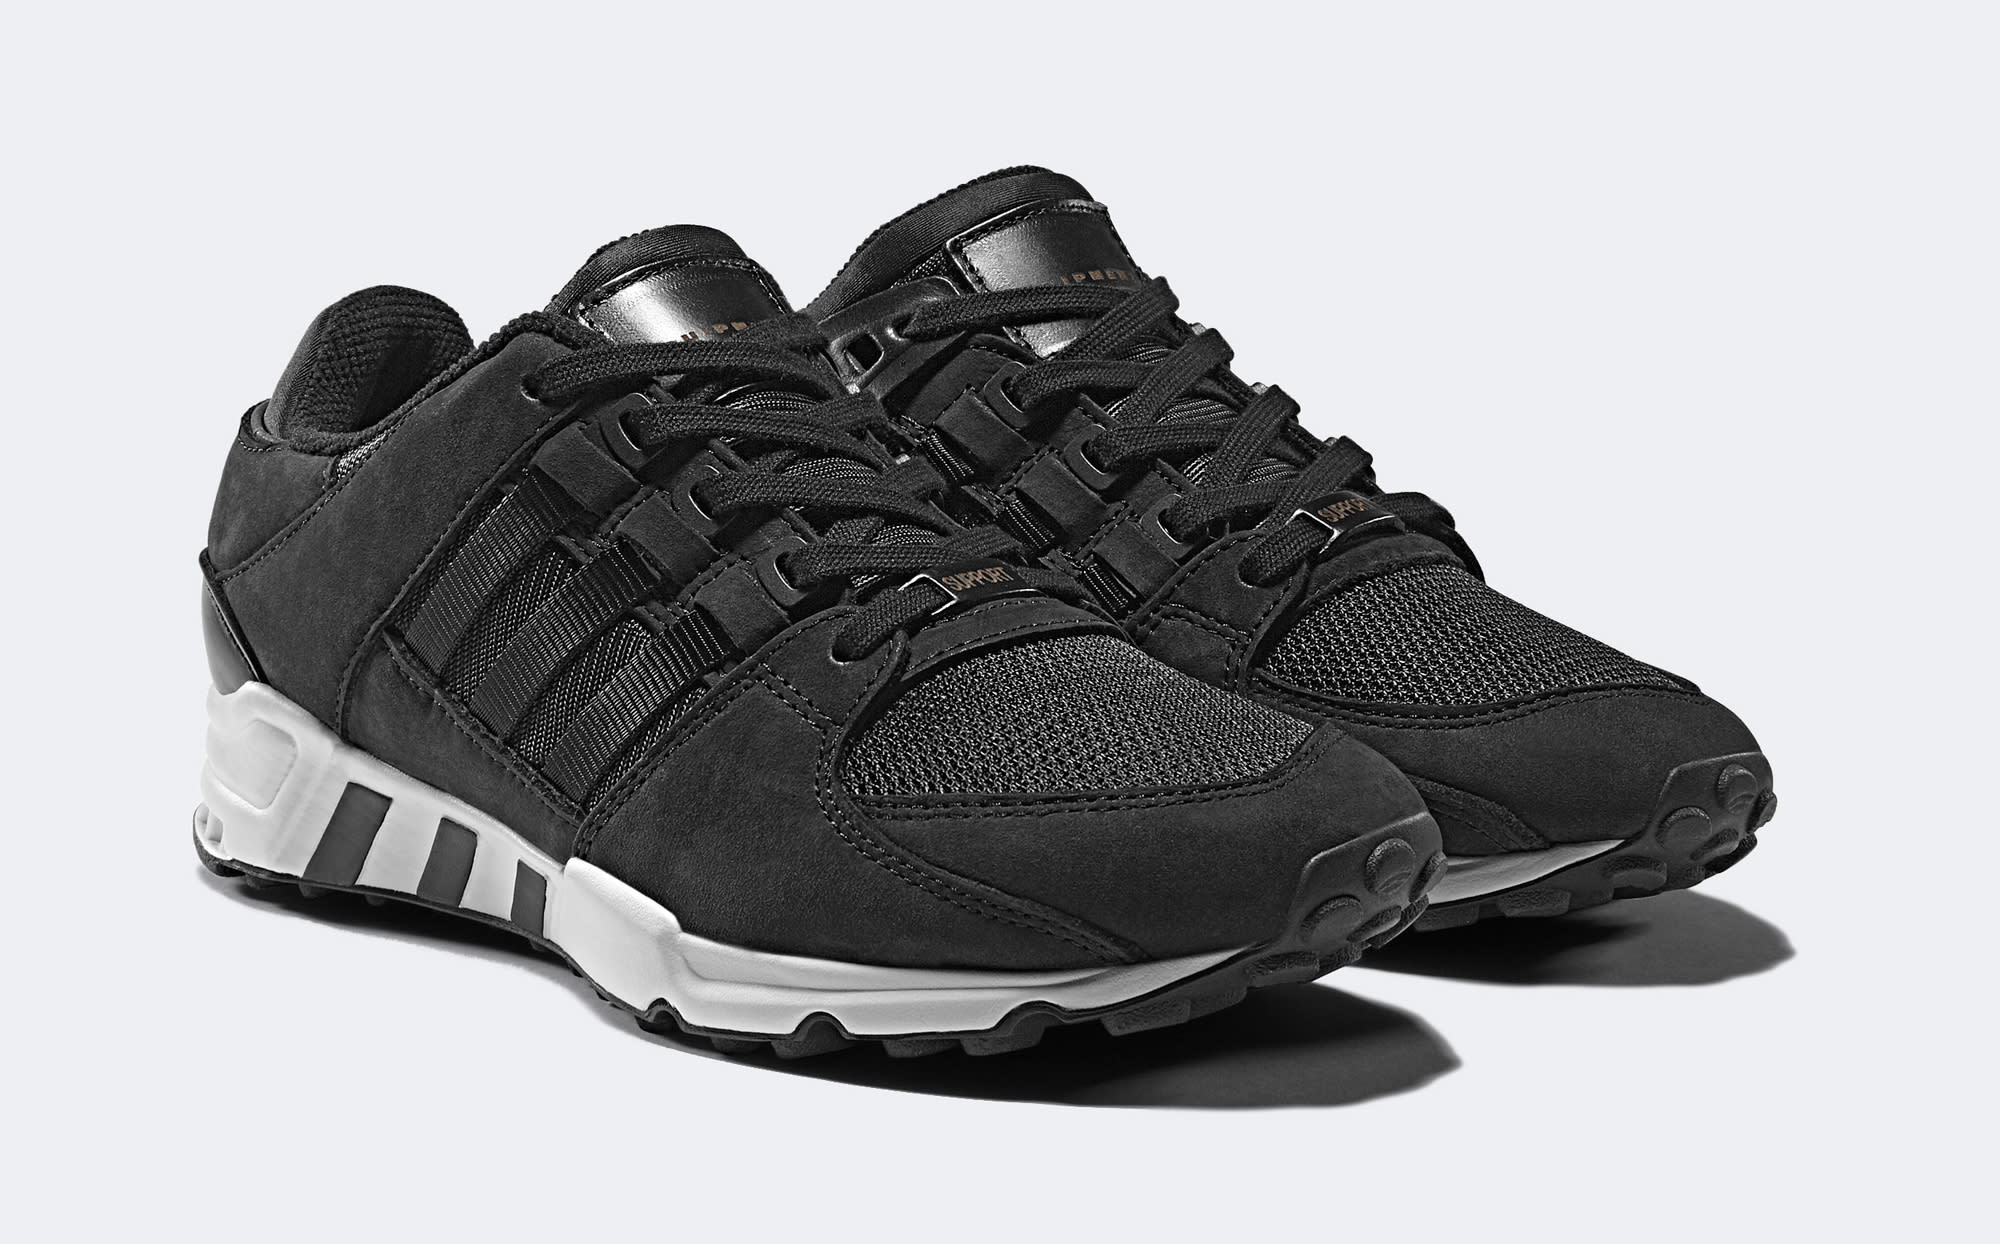 Adidas EQT Milled Leather Pack 5